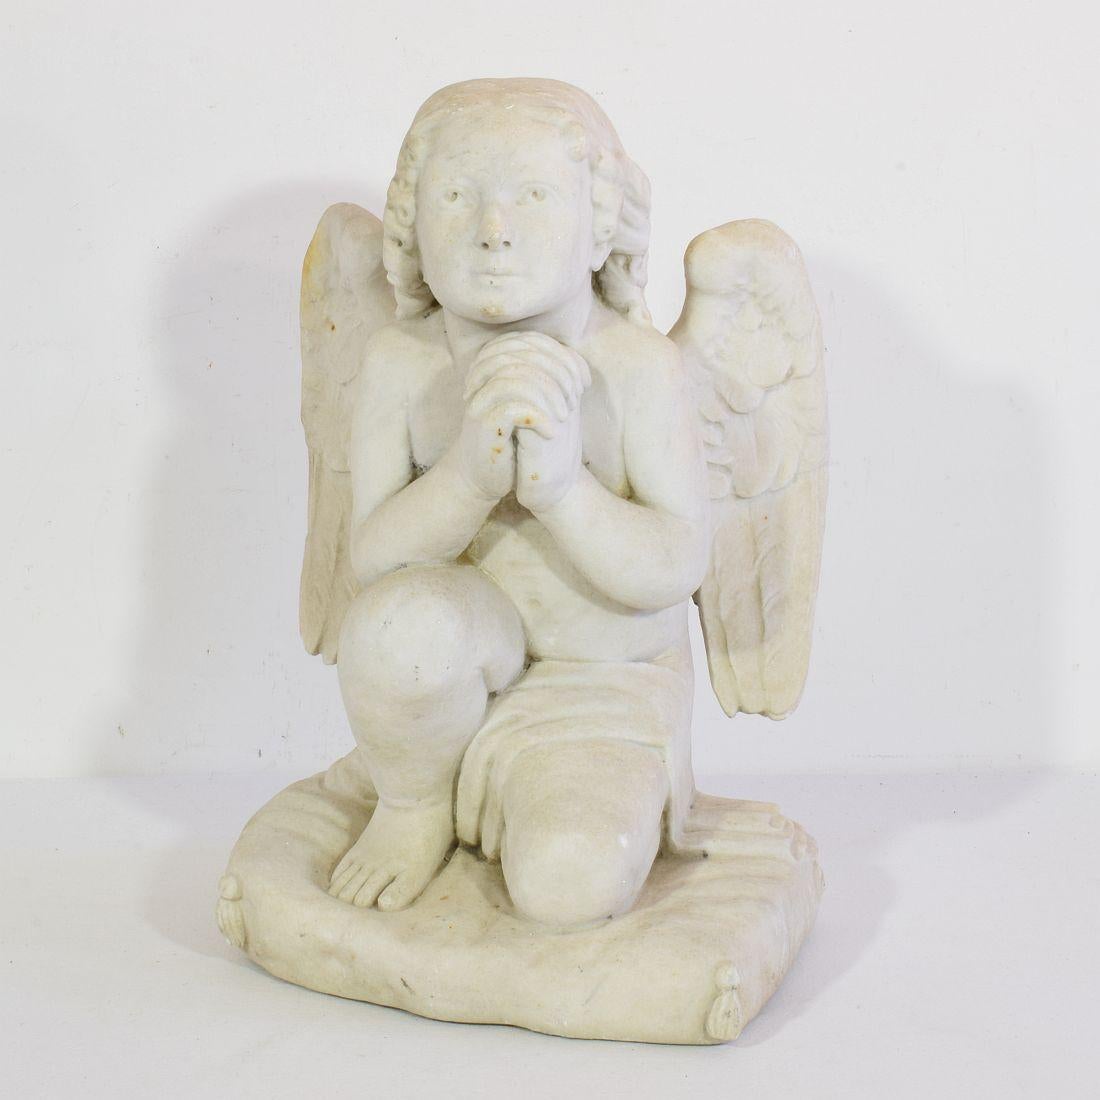 Beautiful hand carved marble angel. Made out of one piece, France, circa 1850. Weathered and small losses. More pictures are available on request.